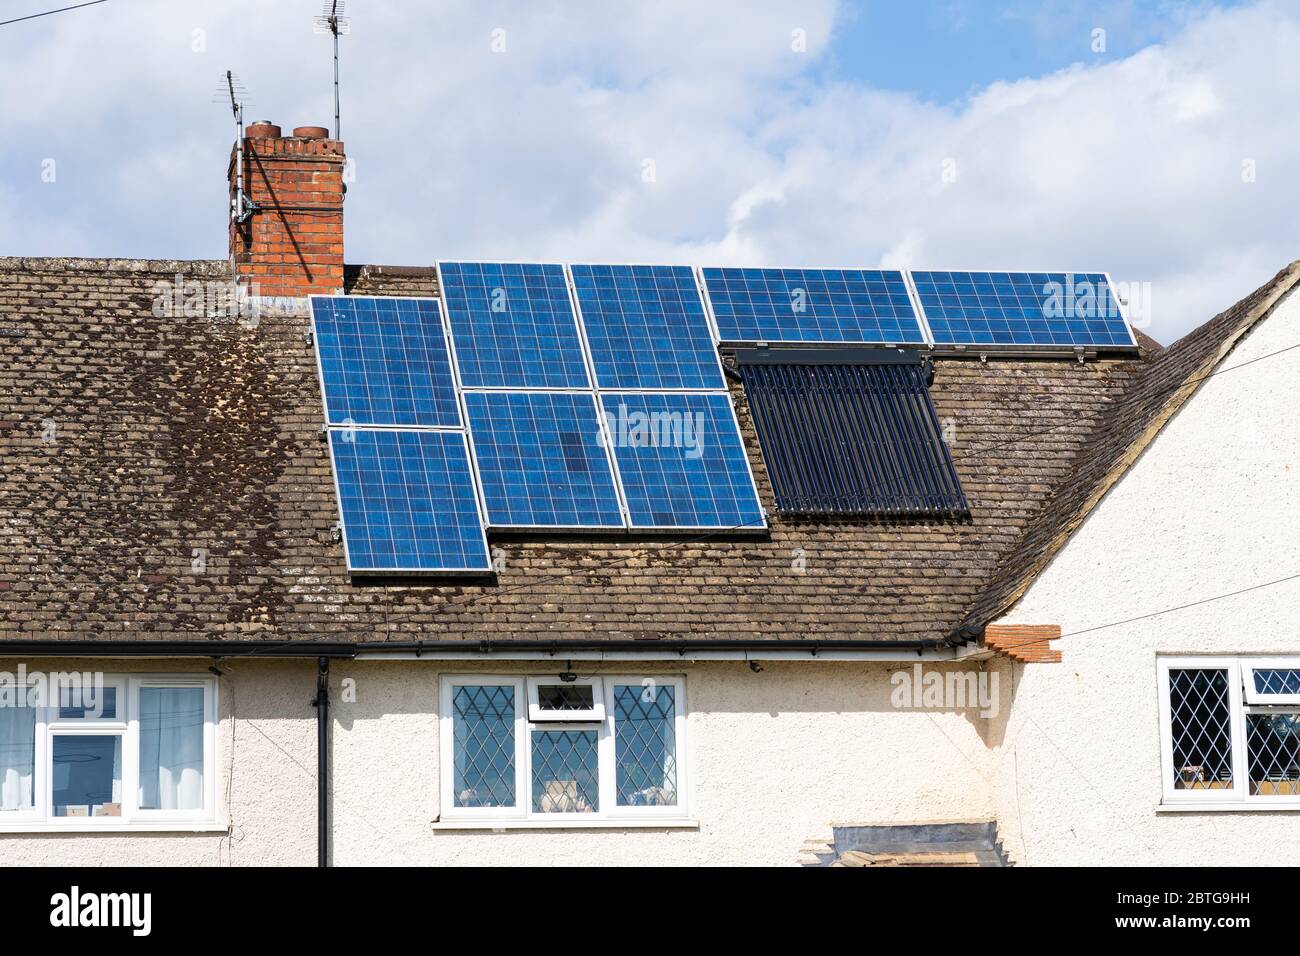 Modules of solar electricity panels (photovoltaics - PV) and solar water heating panels capturing the sun's energy on a house roof in Berkshire, UK Stock Photo